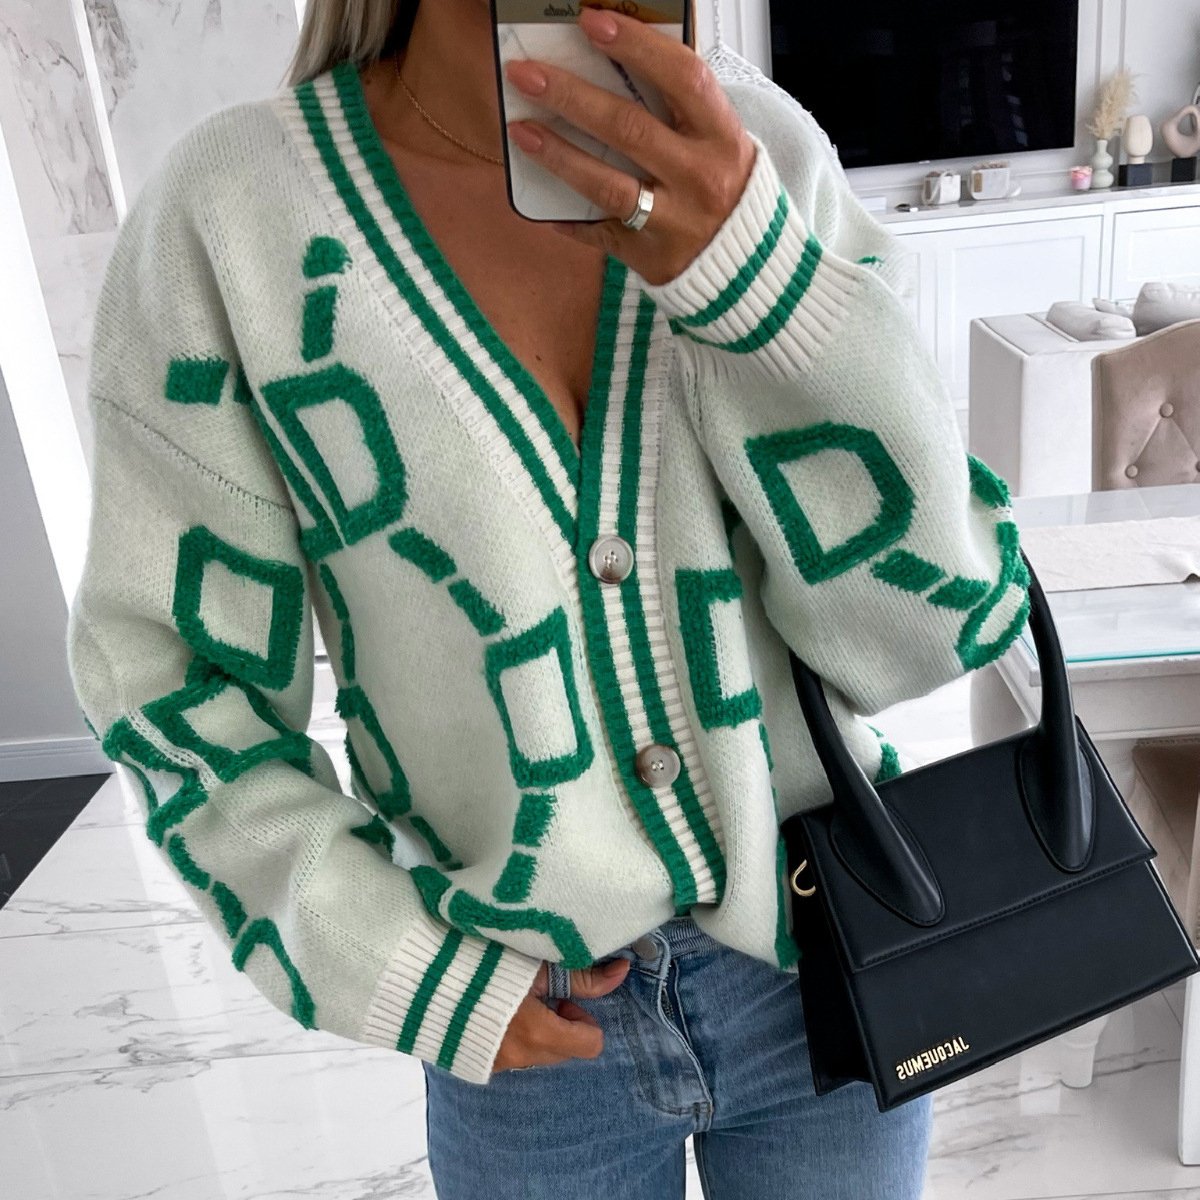 High Contrast Knit Cardigan, V-Neck Button Up Cardigan Sweater, Casual Tops For Fall & Winter, Women's Clothing - White, M